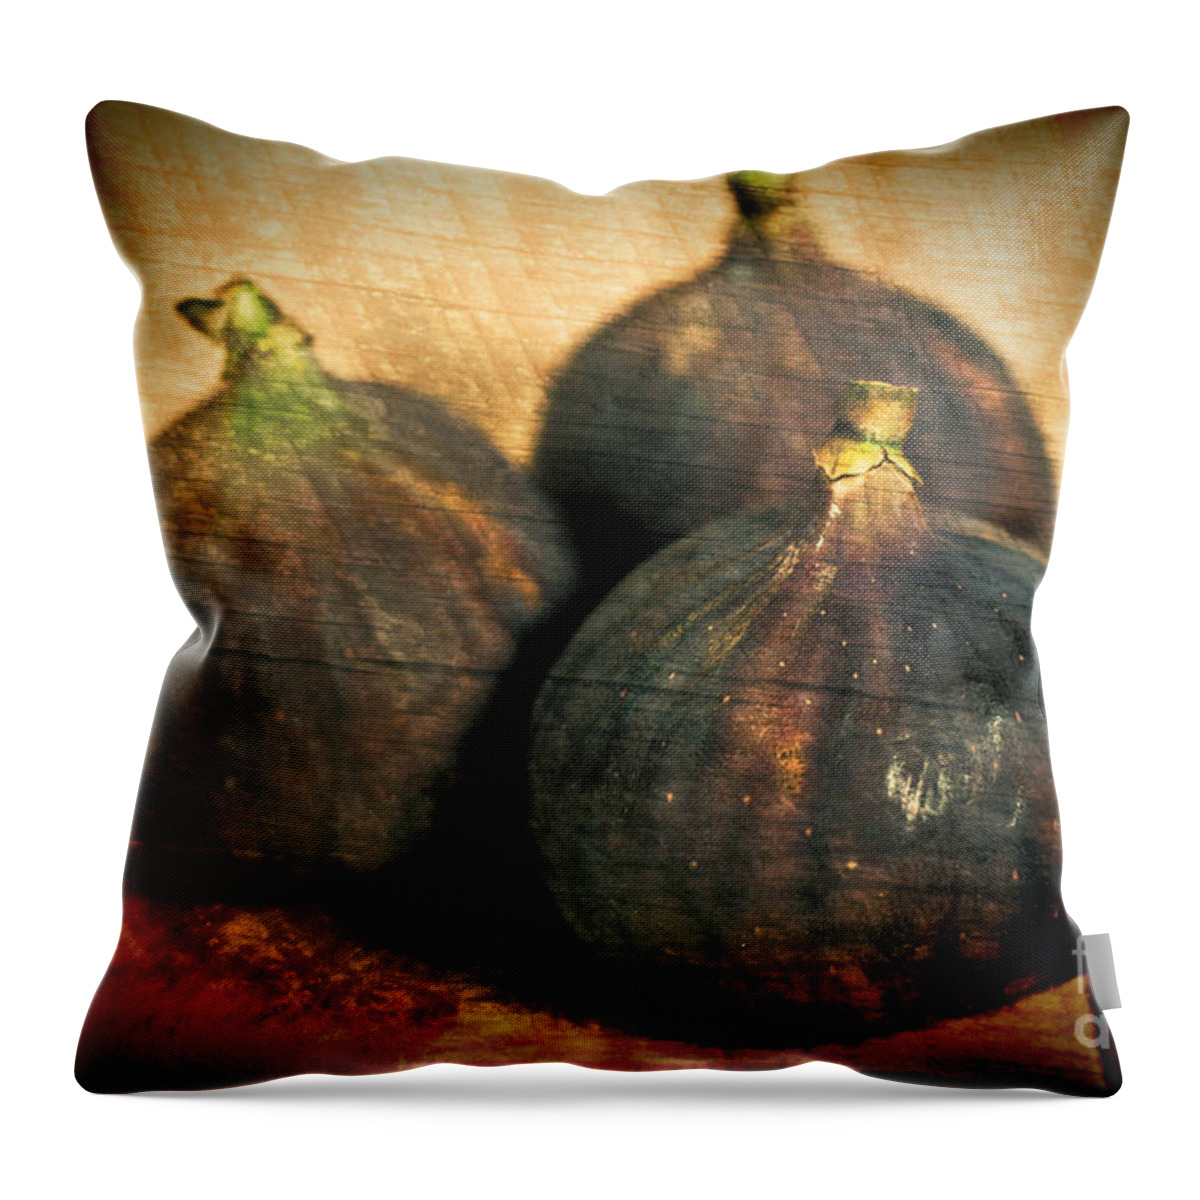 Three Figs Throw Pillow featuring the photograph The Three Amigos by Steve Purnell